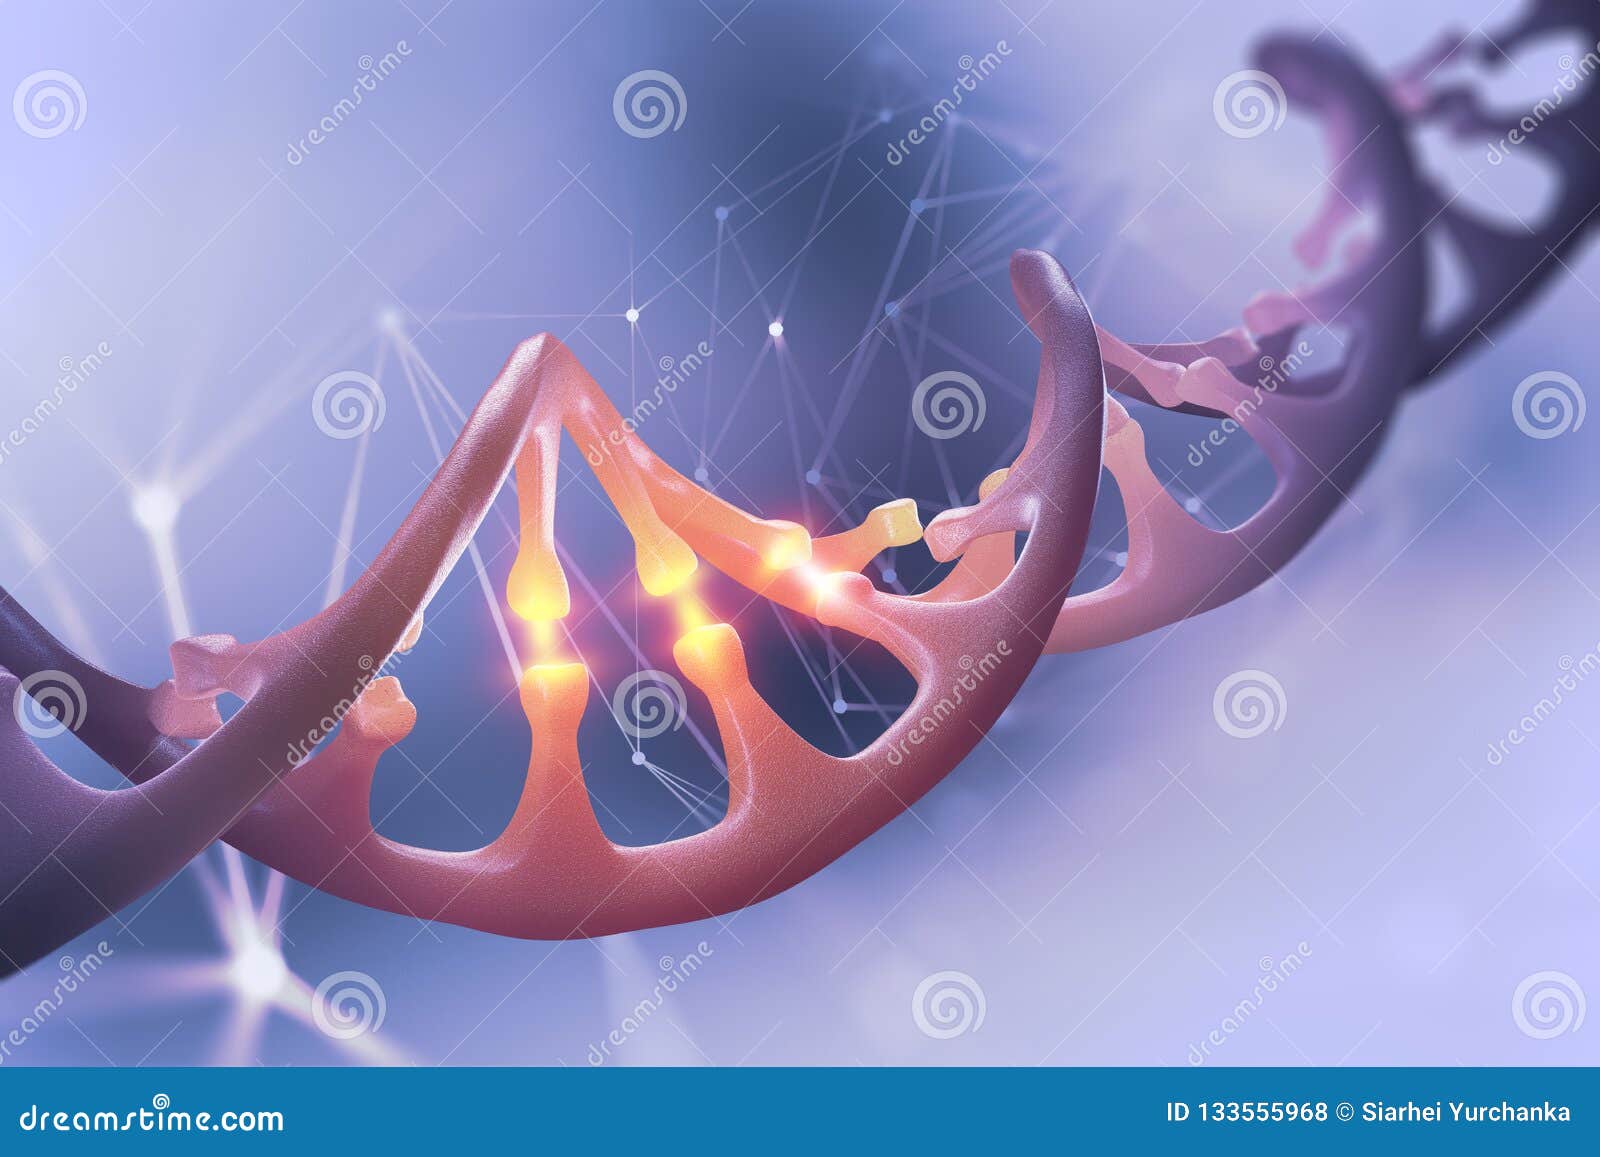 dna 3d . decoding genome sequence. scientific studies of structure of dna molecule. helix decomposing